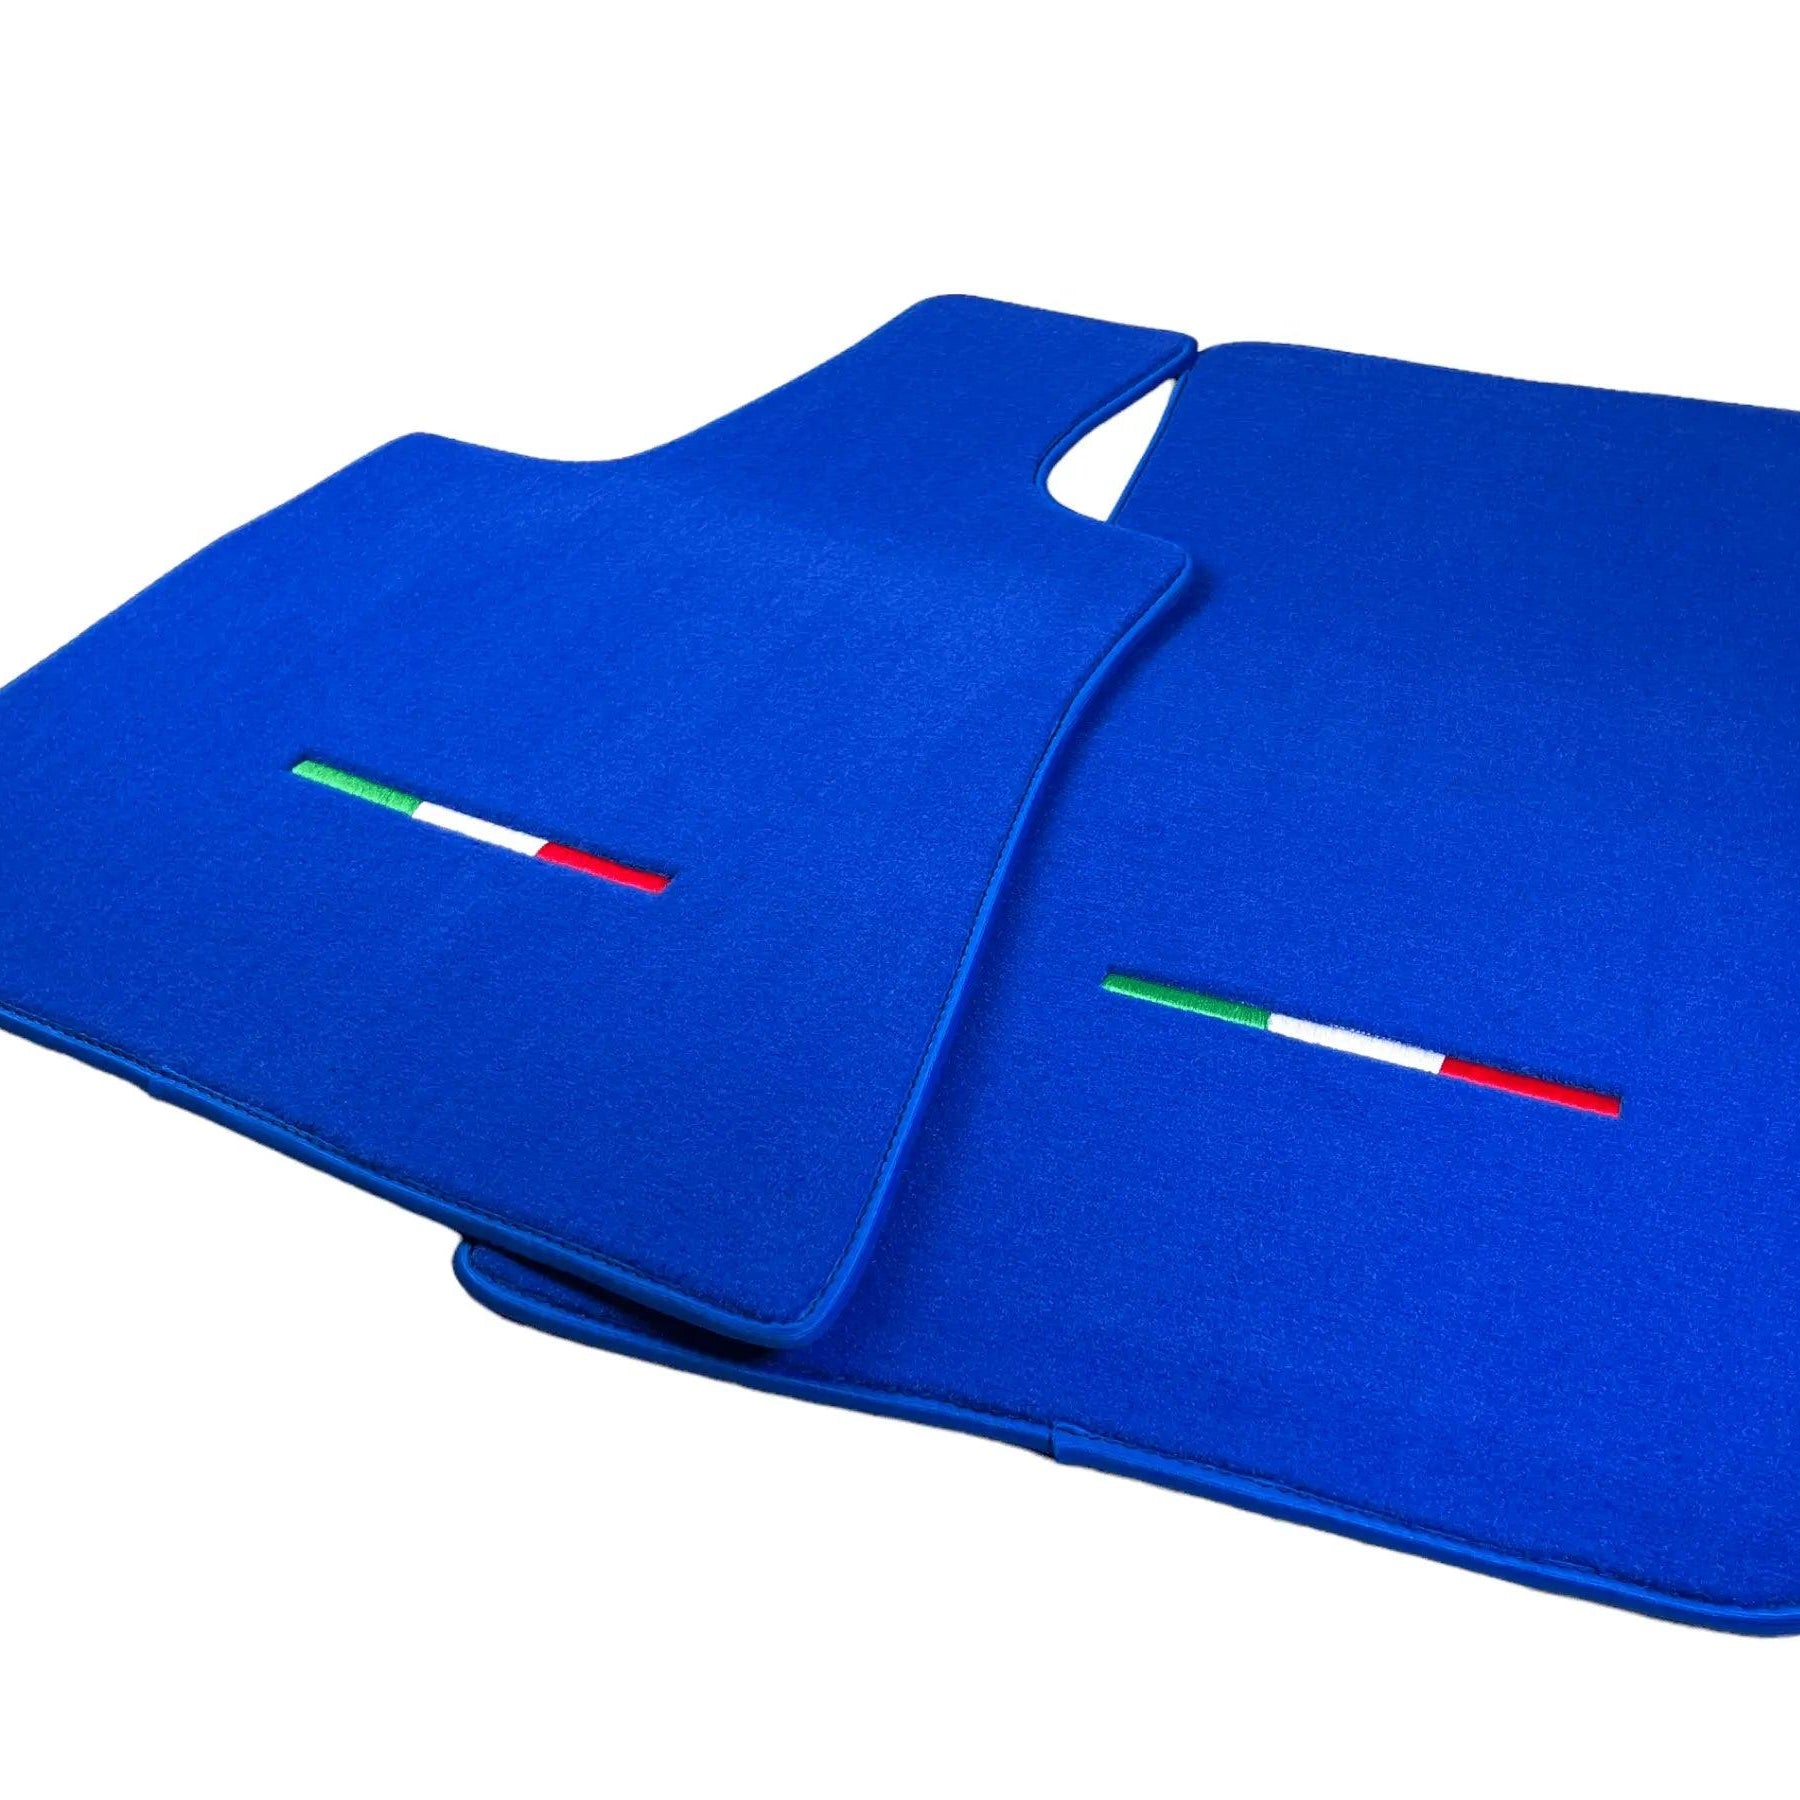 Blue Floor Mats For Maserati Coupé (2001-2007) Italy Edition - AutoWin